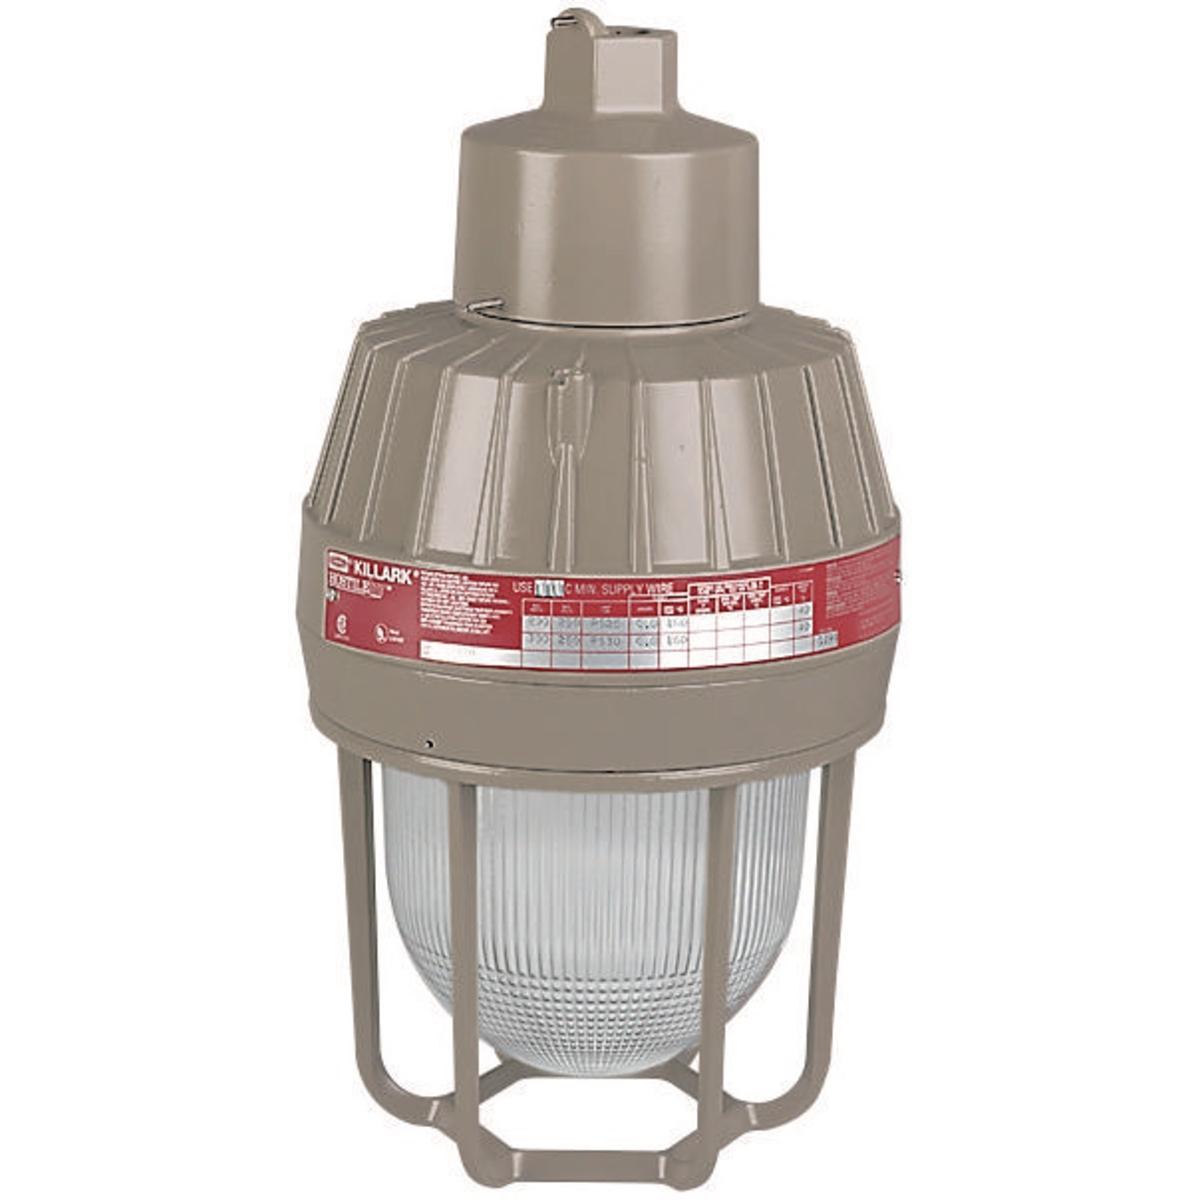 Hubbell EMI30A2 Incandescent 2/300W  3/4" Pendant  ; Four light sources—Incandescent, compact fluorescent, high pressure sodium and metal halide ; Mounting choice—Pendant, ceiling, 25˚ stanchion or 90˚ wall mount, all with “wireless” design that allows fast, easy fixture